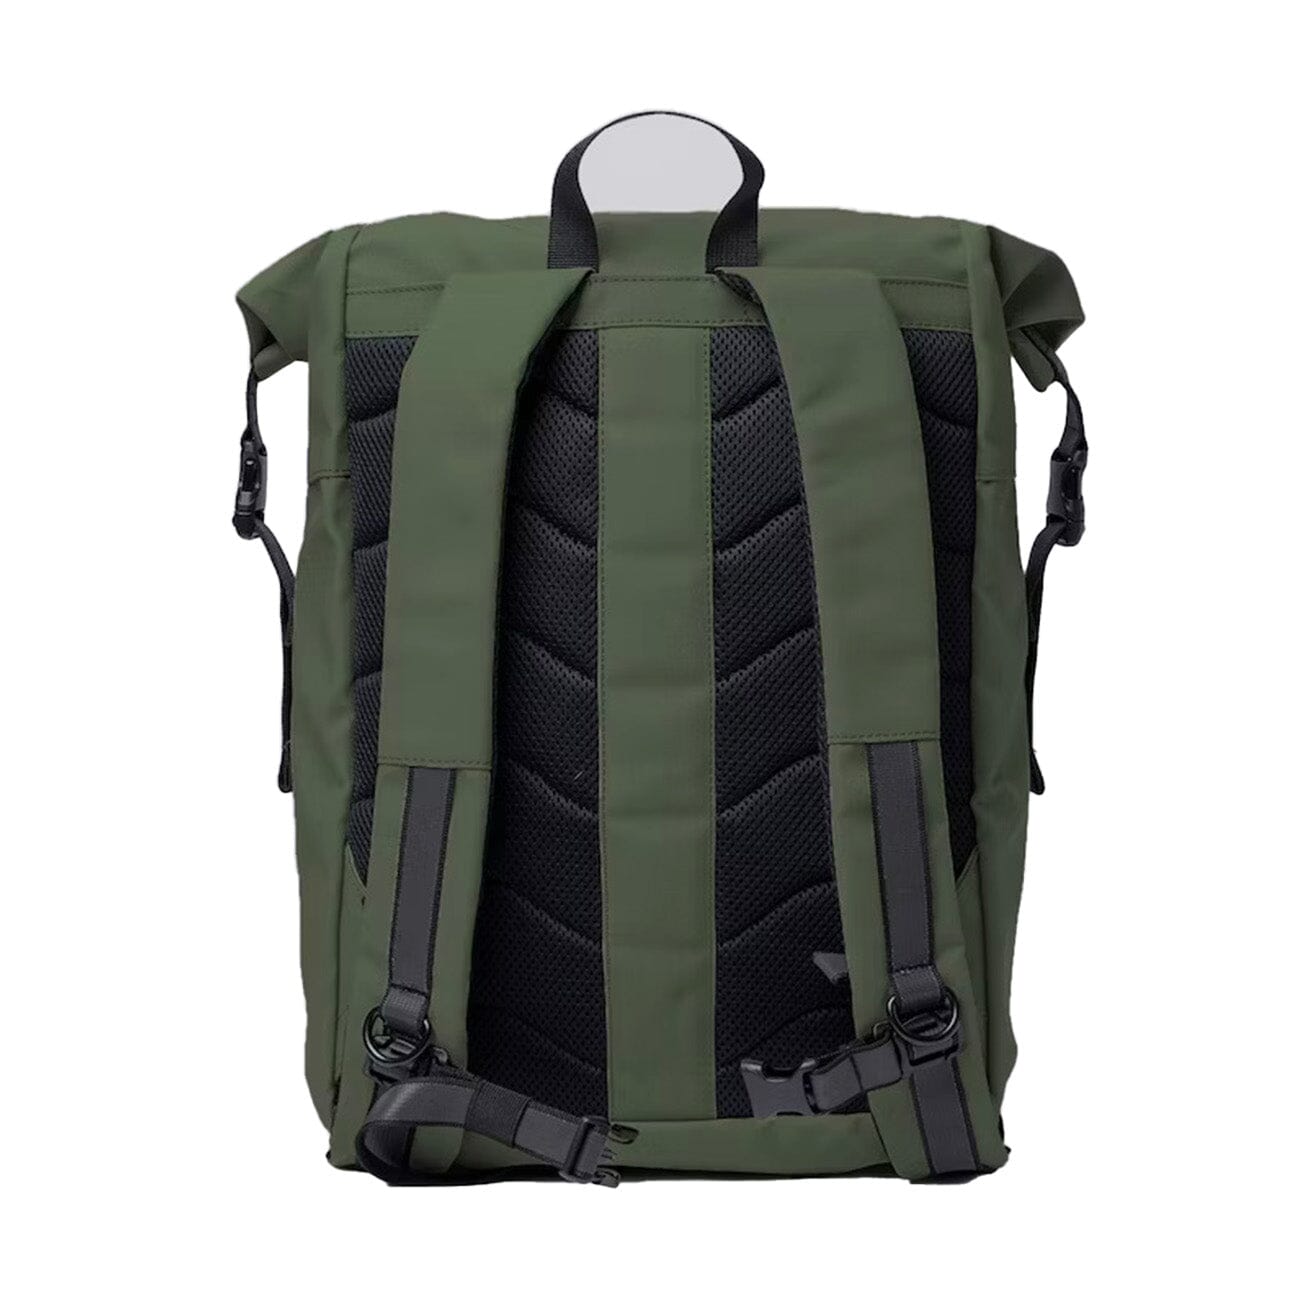 lightweight small backpack backpack recycled fabric with high rain and water resistance roll top green color back view